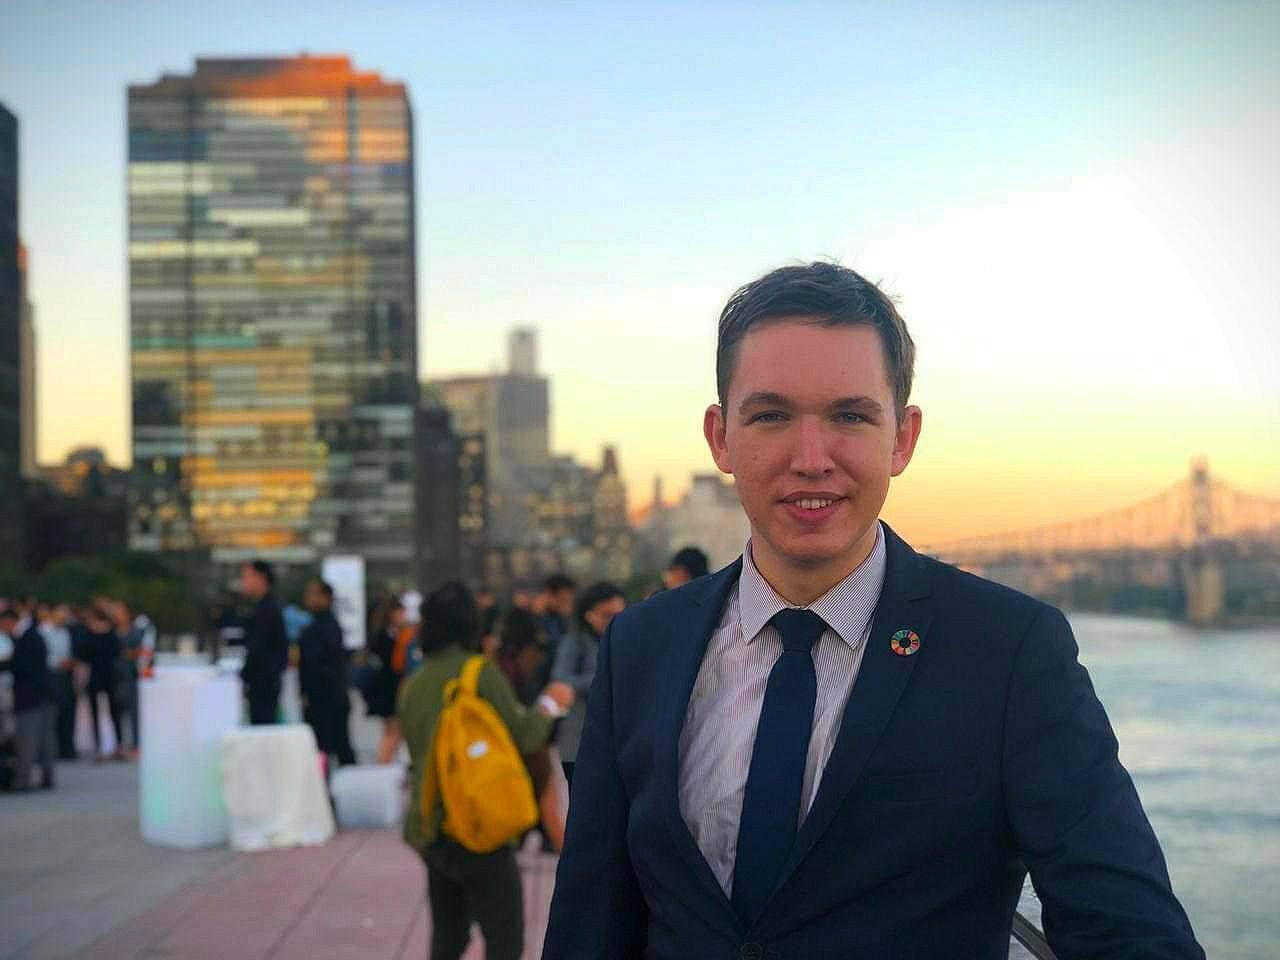 Vladislav Kaim at a reception following the UN Youth Climate Summit in New York, September 2019. Photo: Kaime Silvestre.